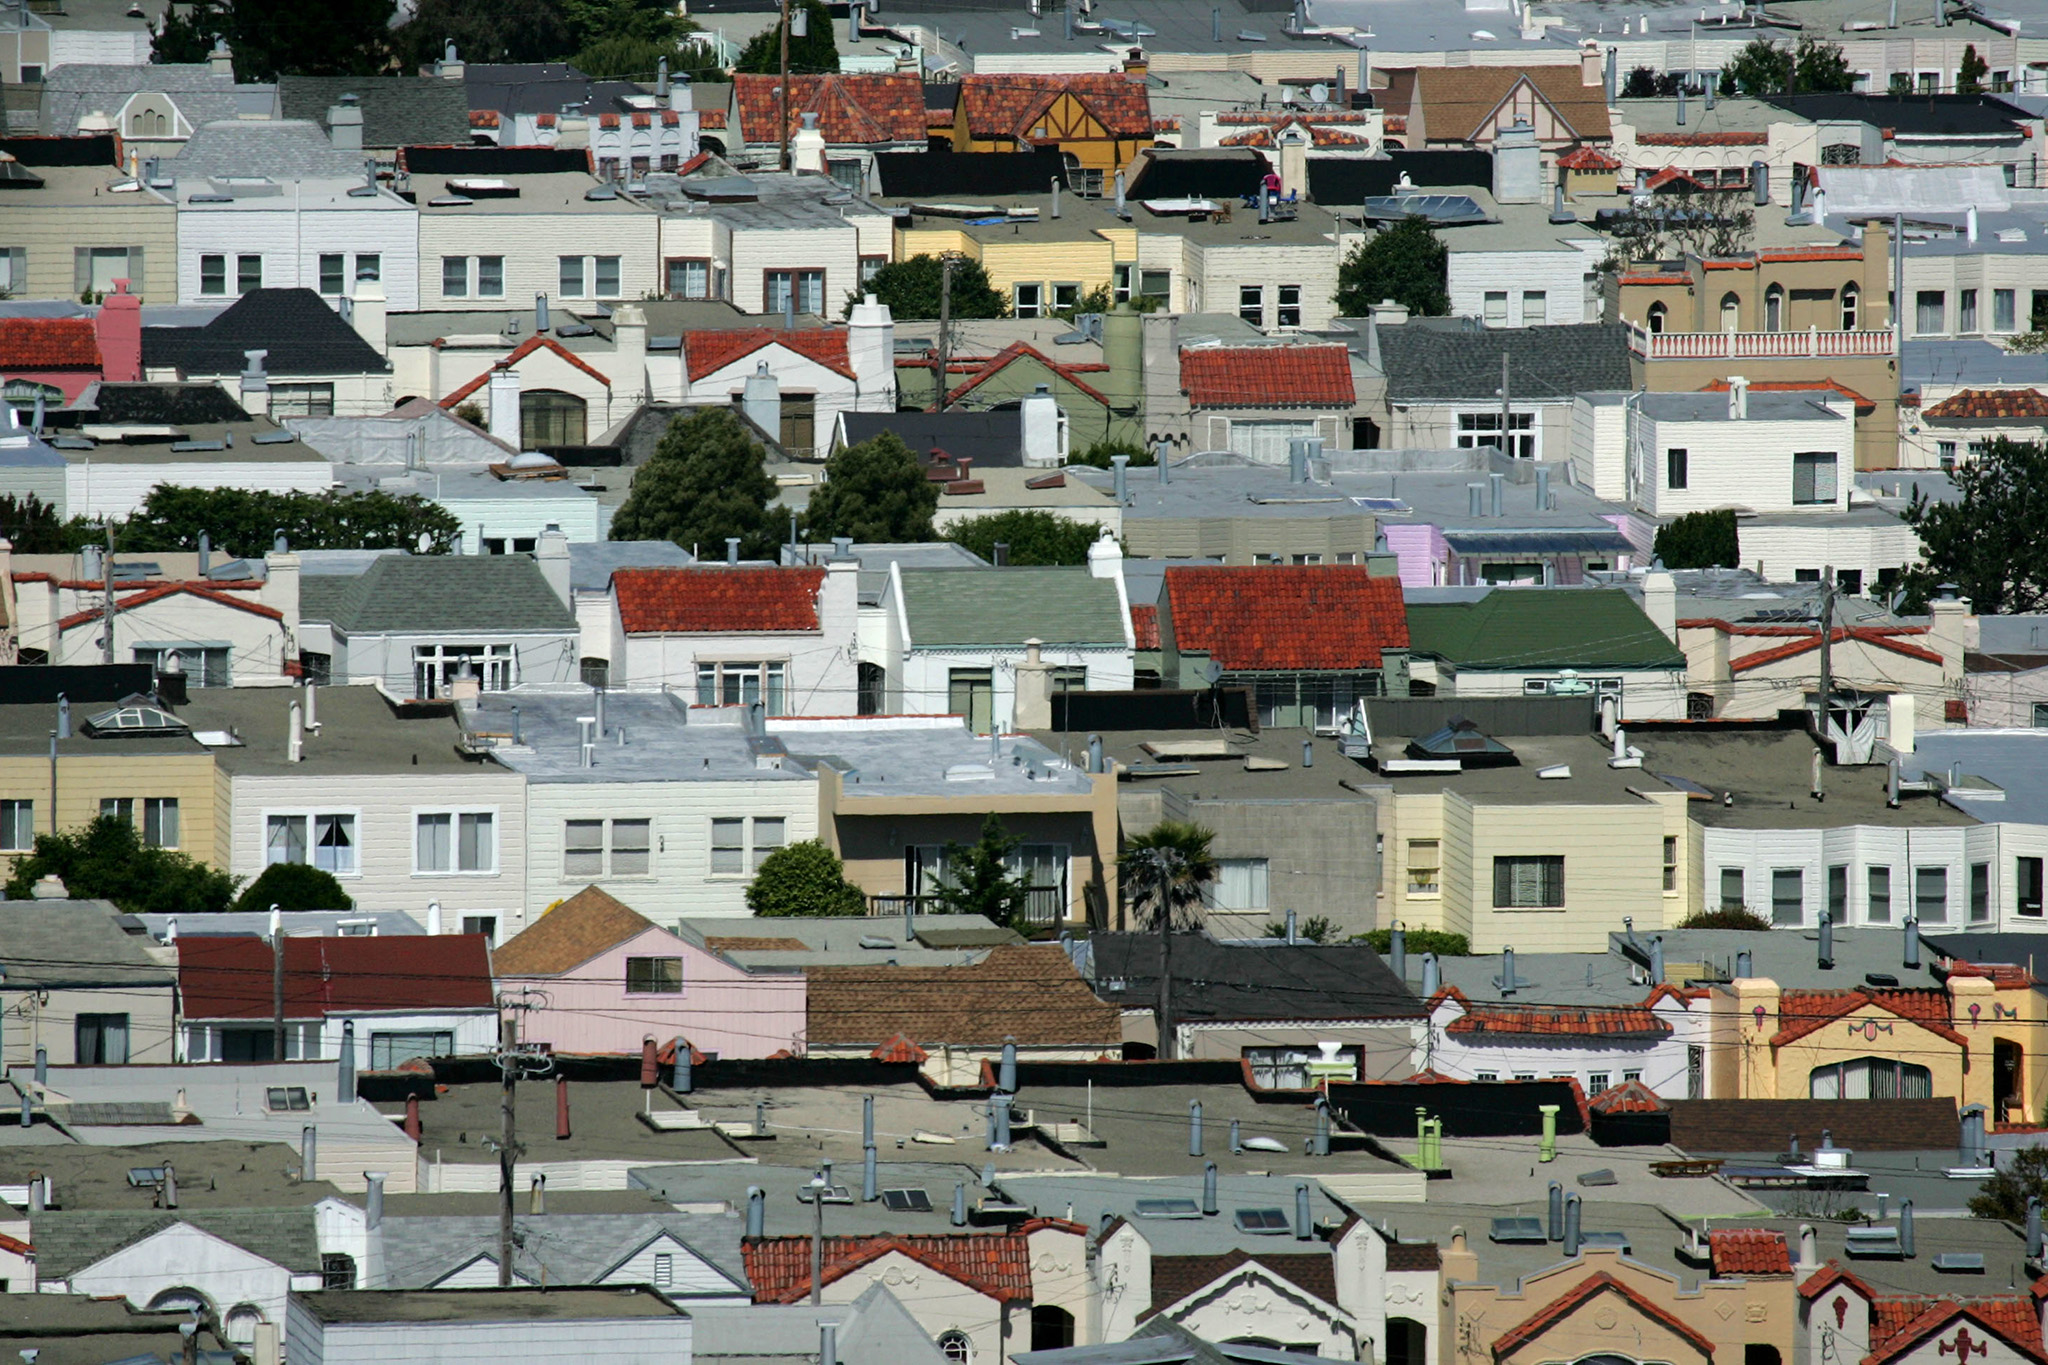 Bay Area housing market reacting to interest rate hikes